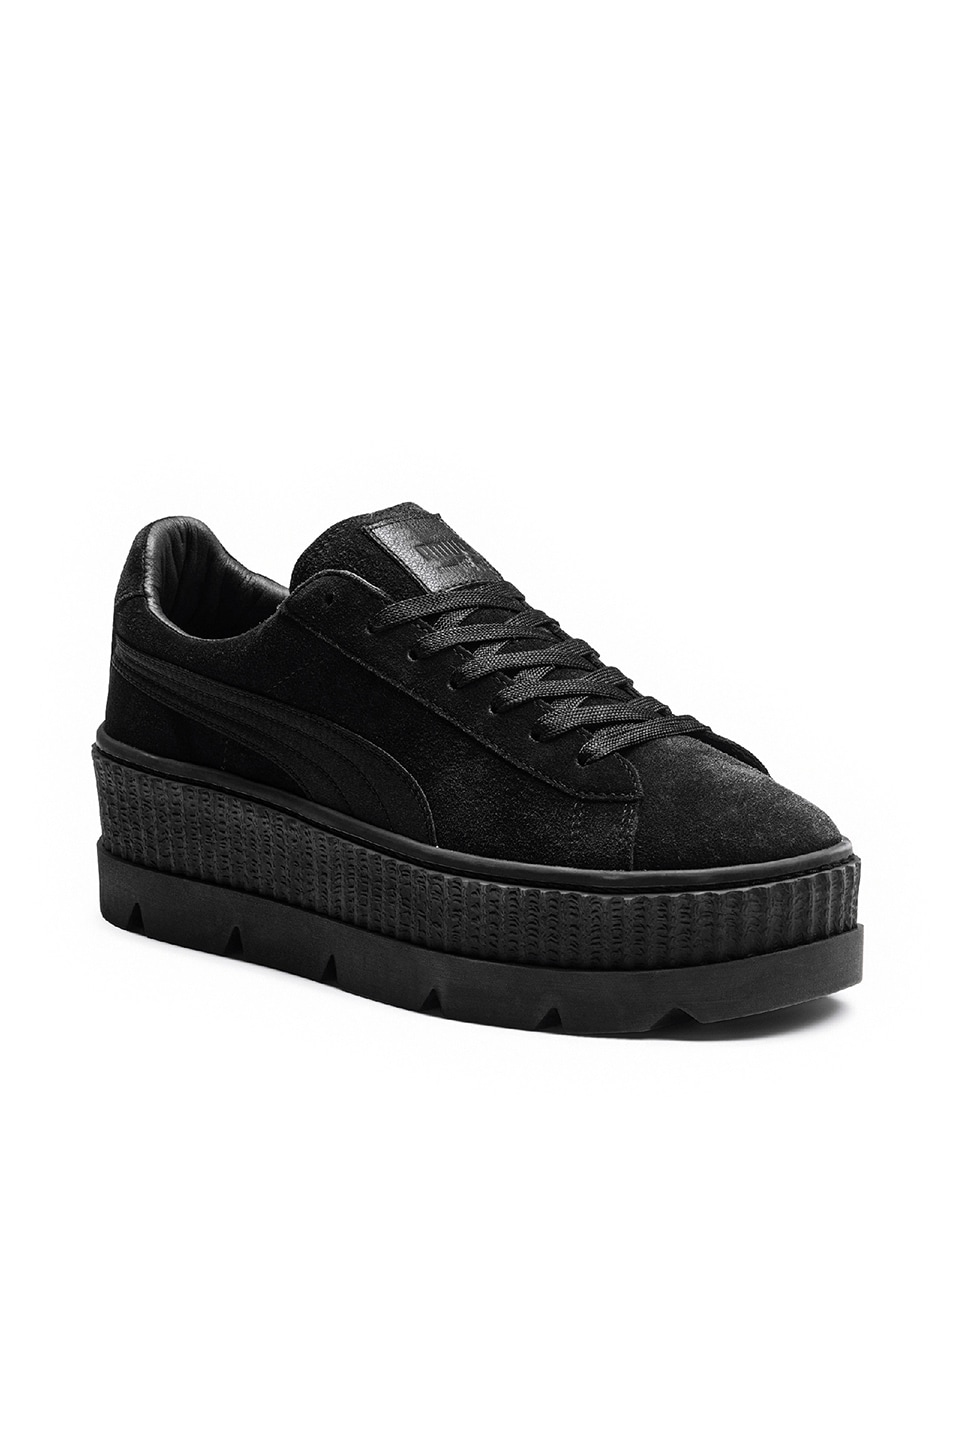 Image 1 of Fenty by Puma Cleated Suede Creeper Sneakers in Black